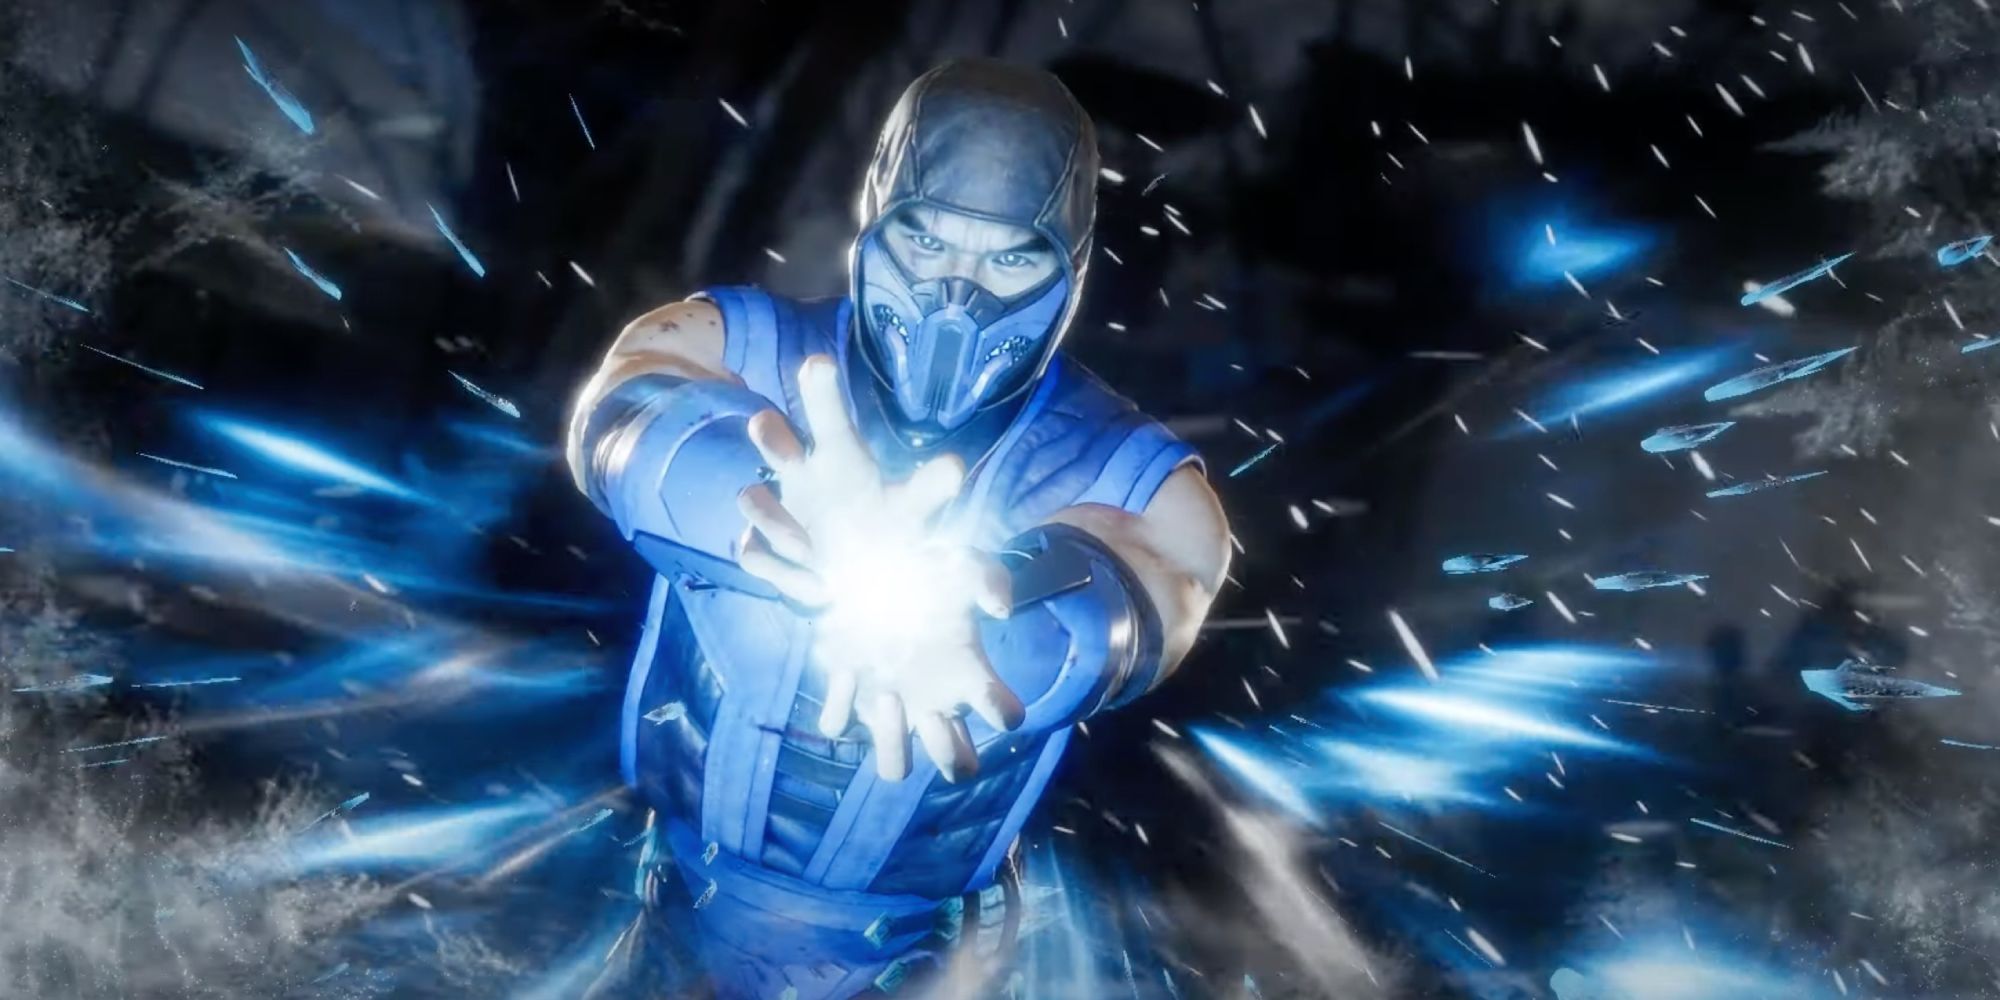 Sub Zero from Mortal Kombat surrounded by his blue icy aura